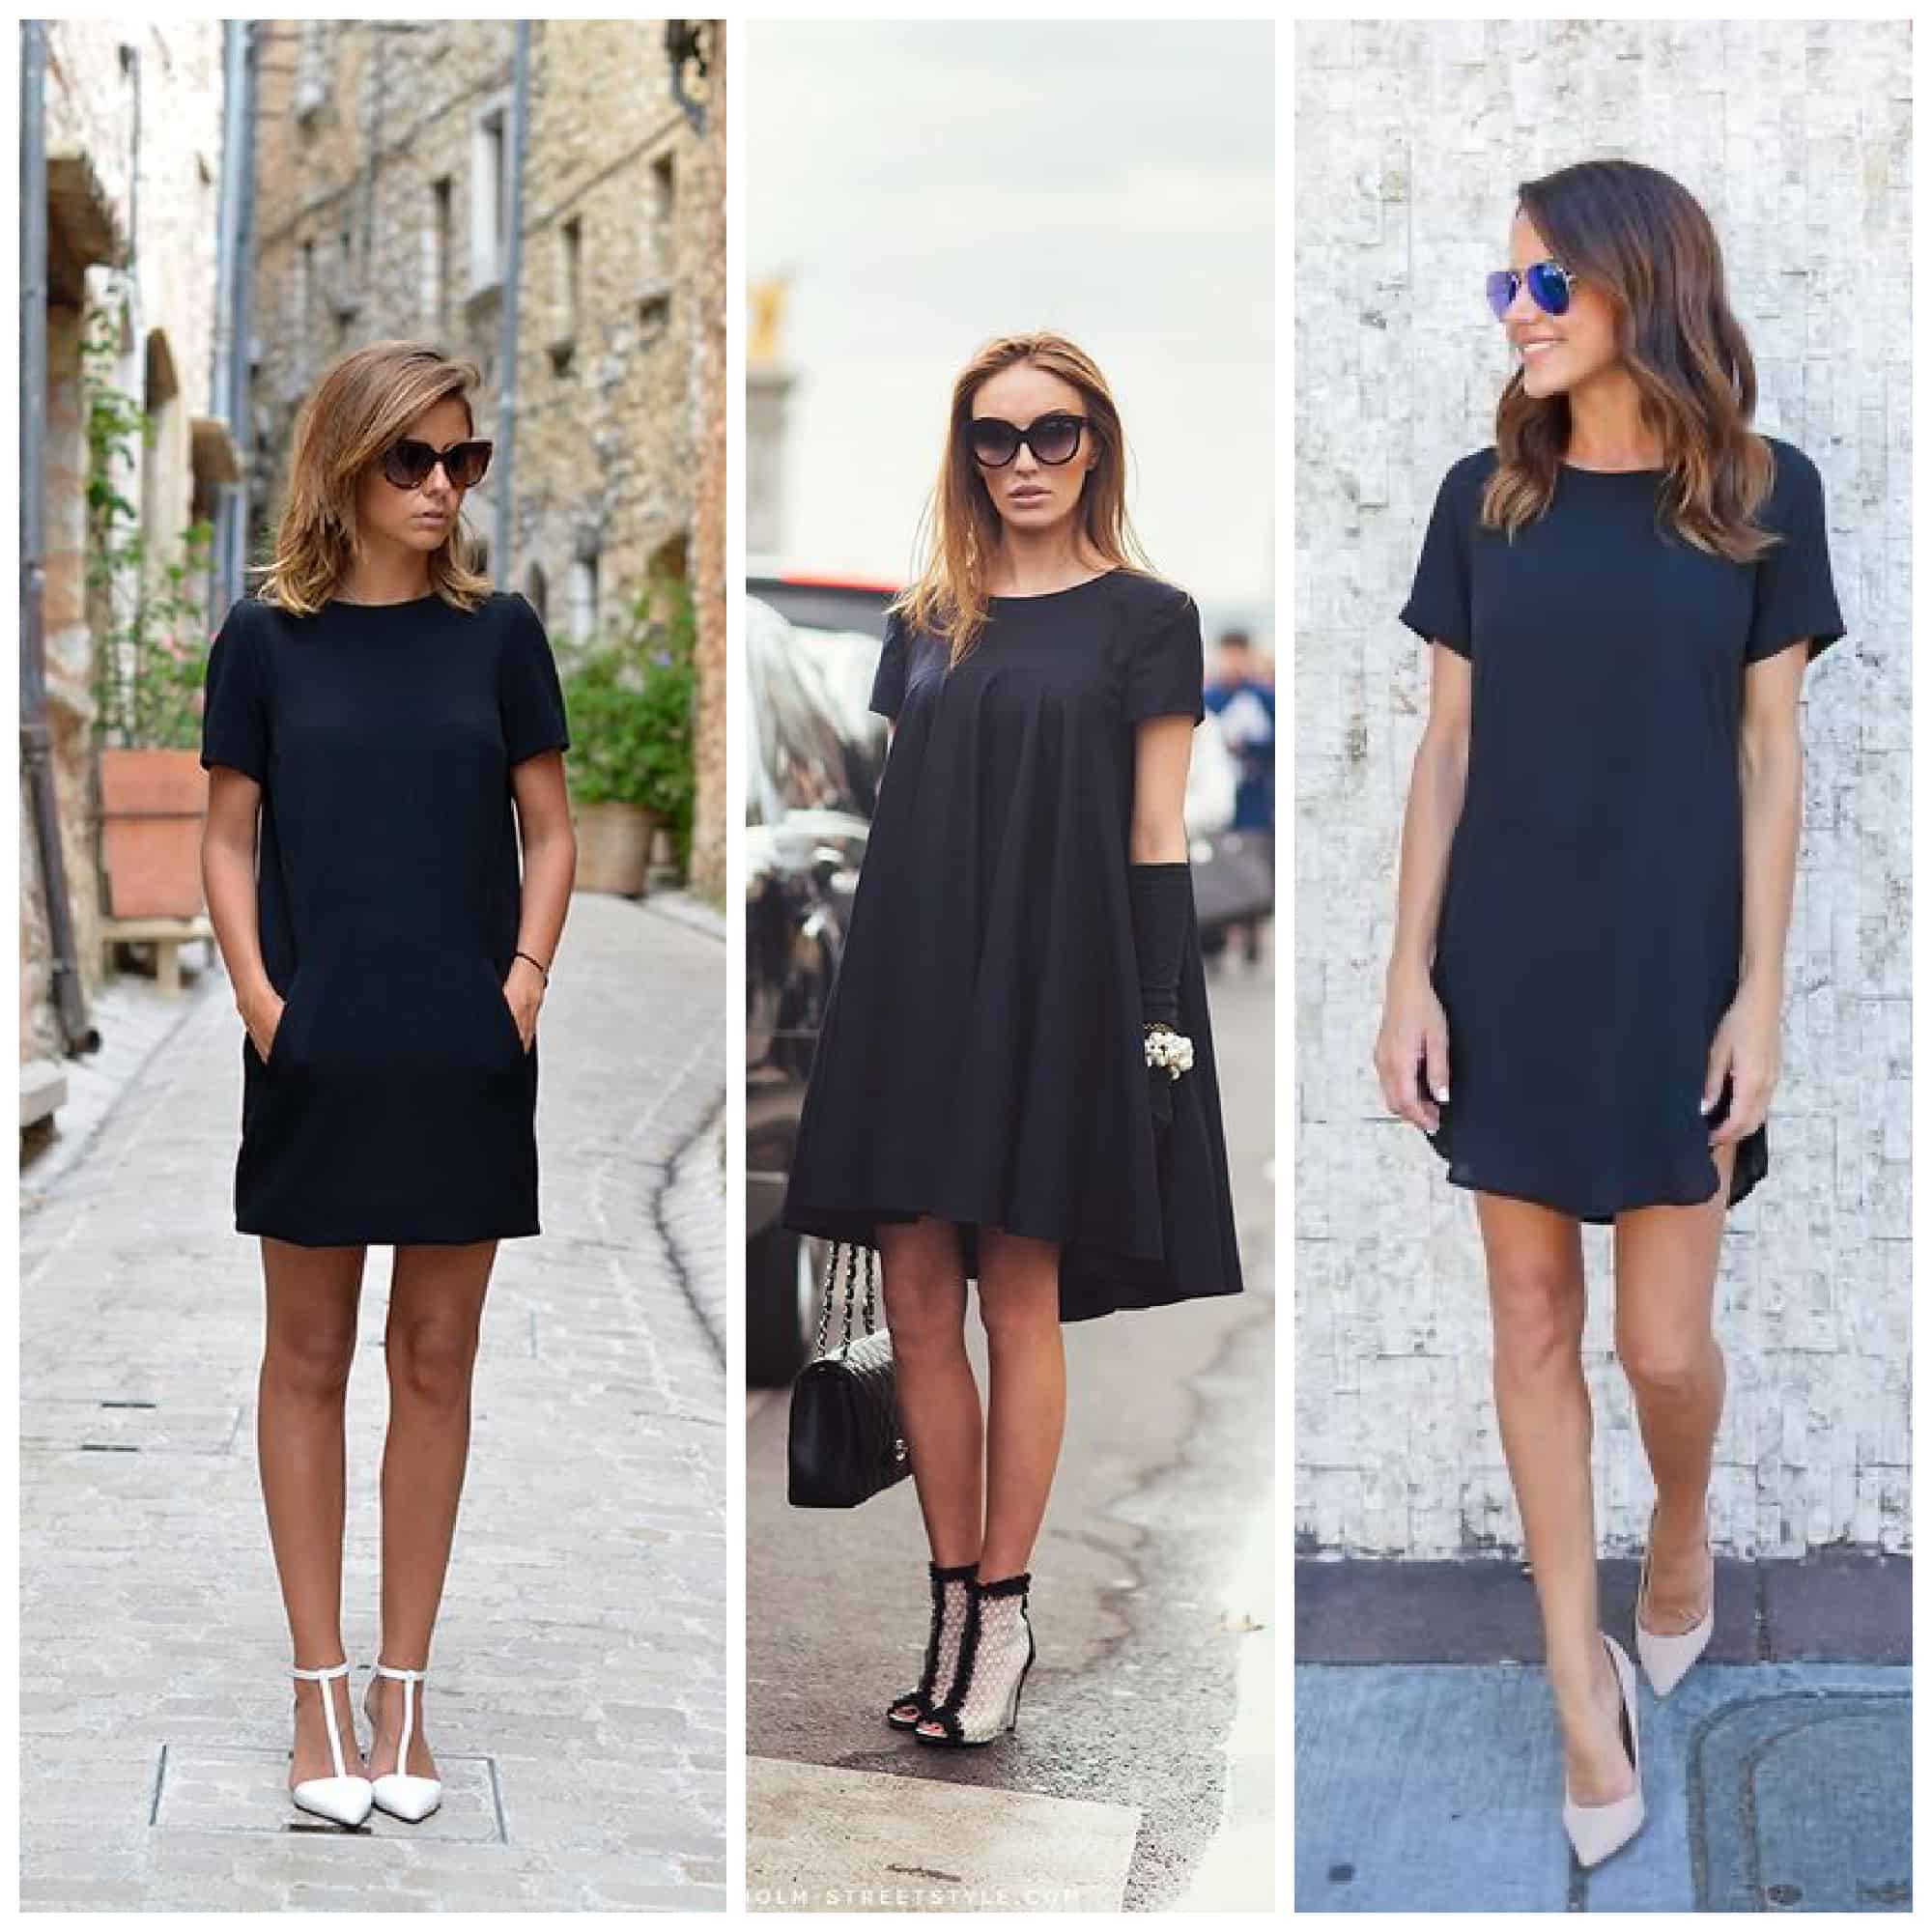 What shoe color goes best with a black dress? - Quora